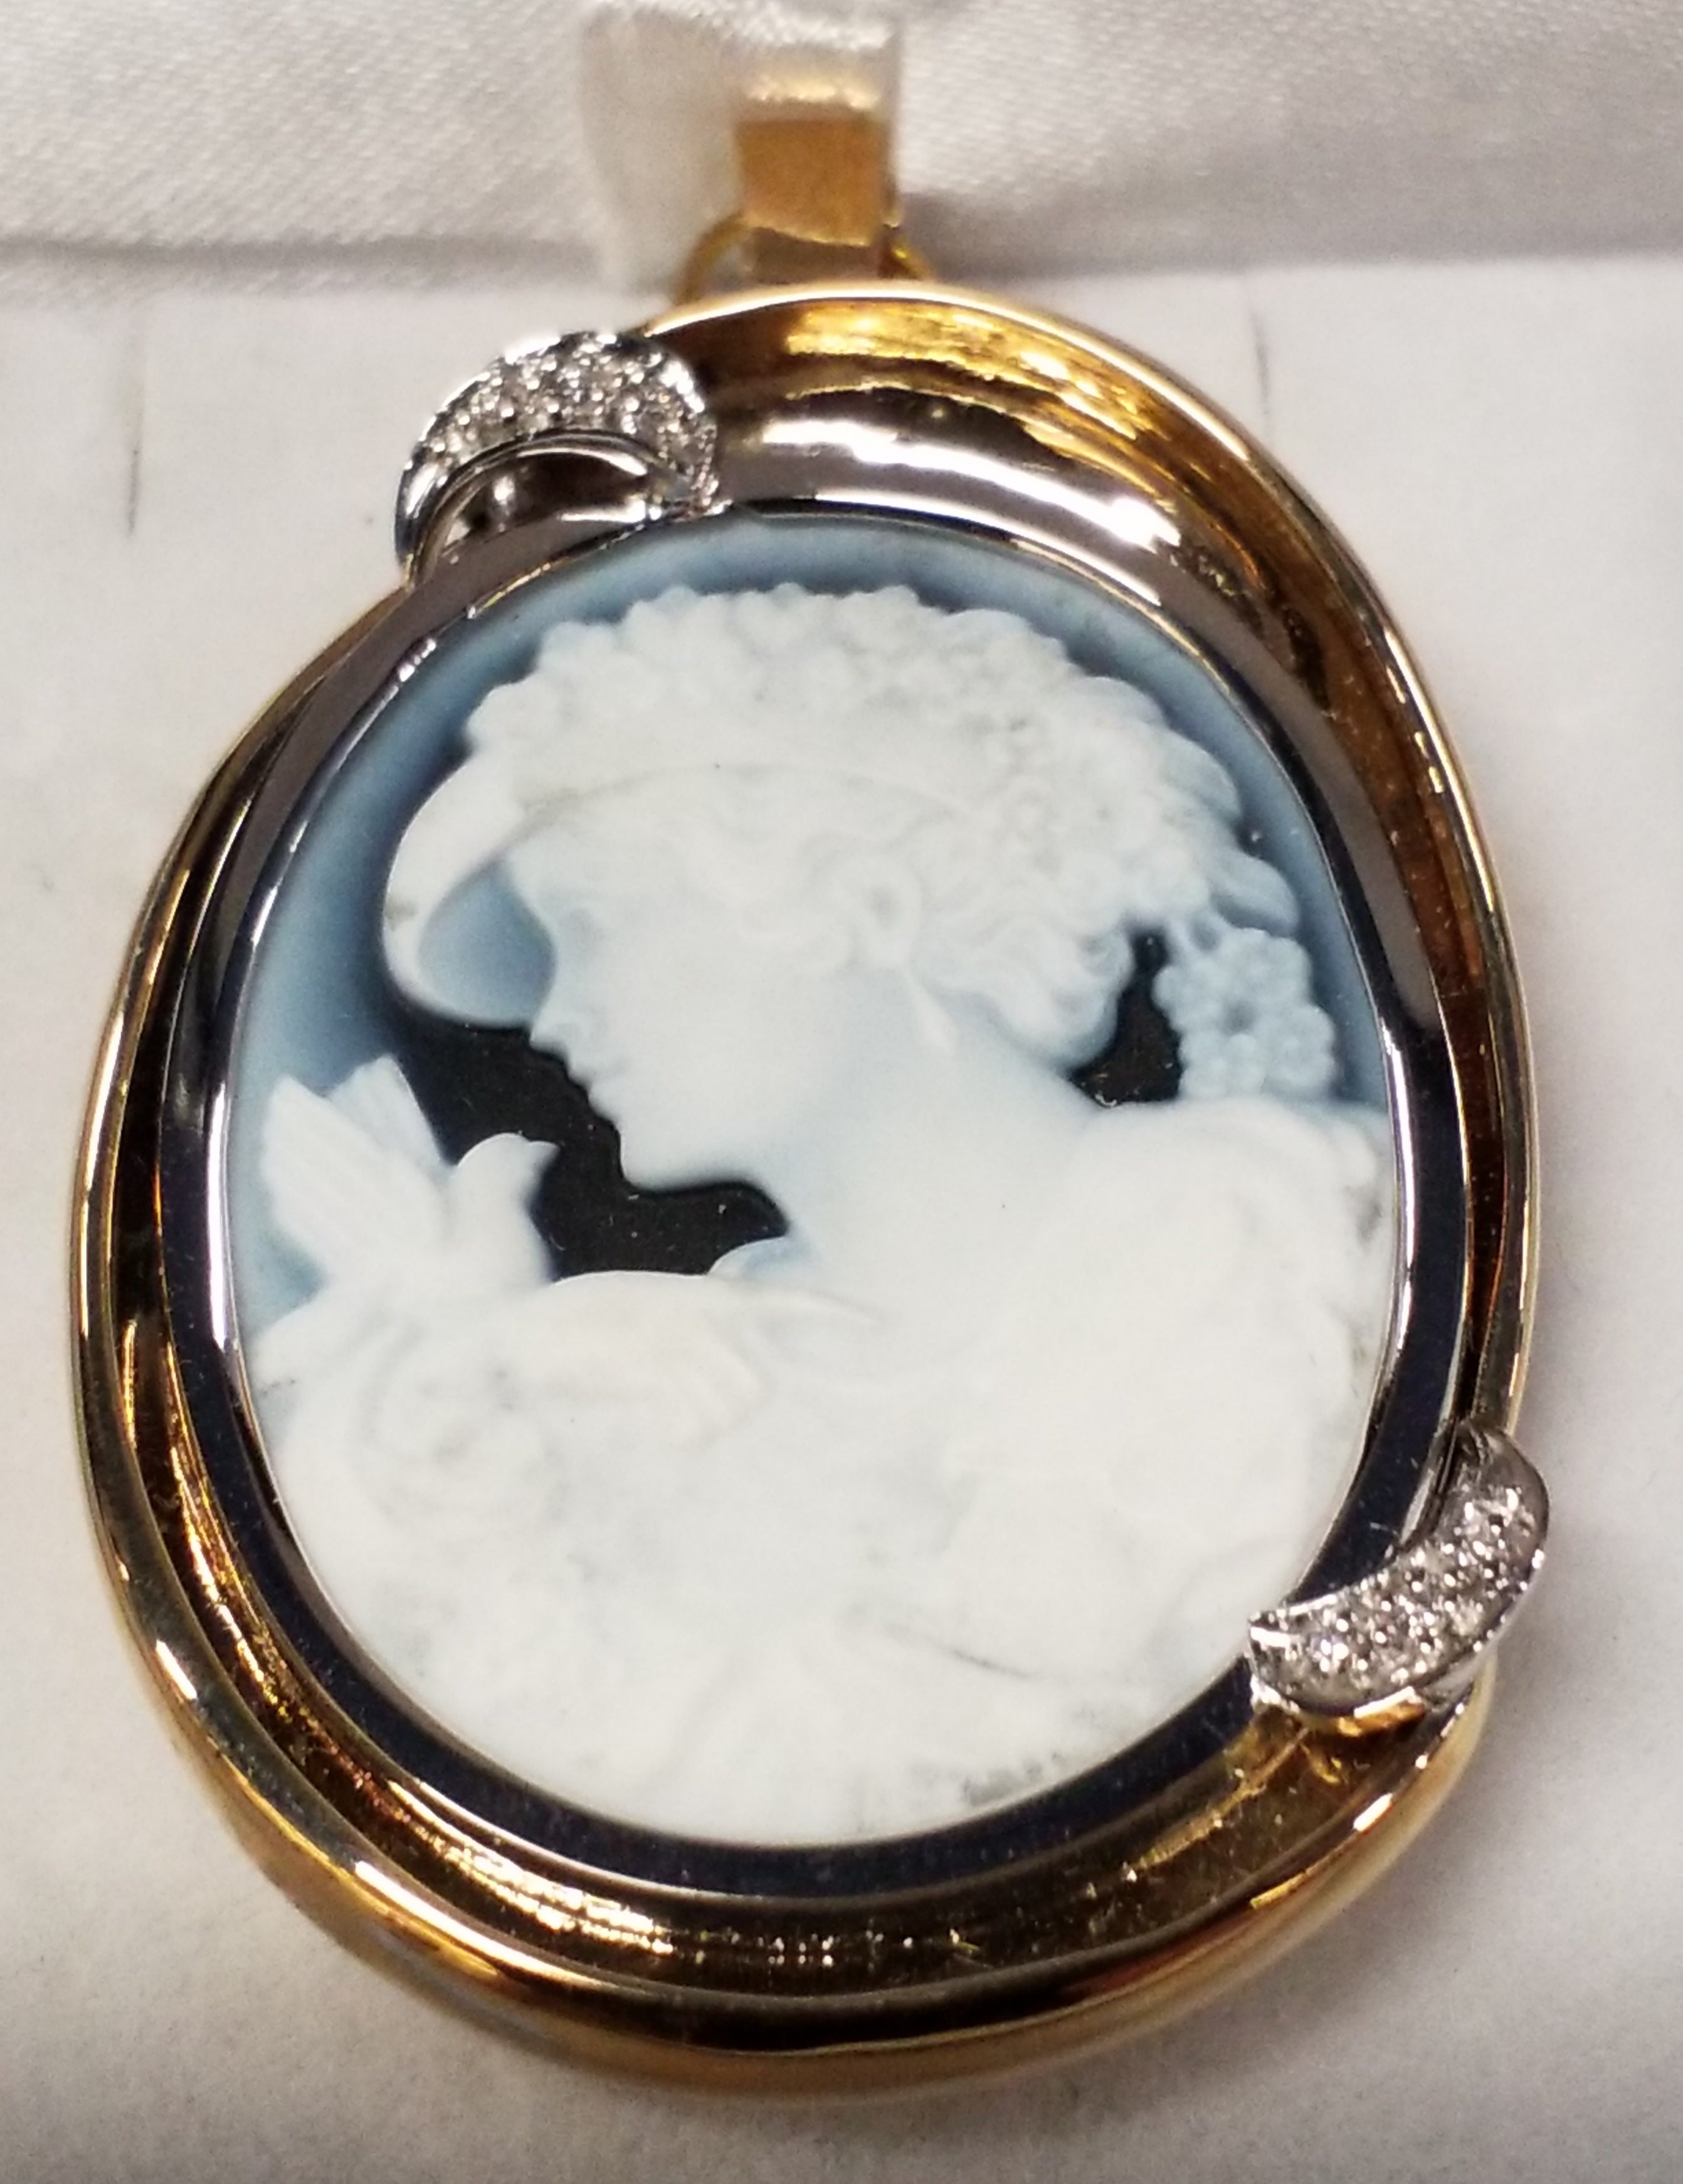 Hand Cut Oval Cameo Brooch with Diamond Accents